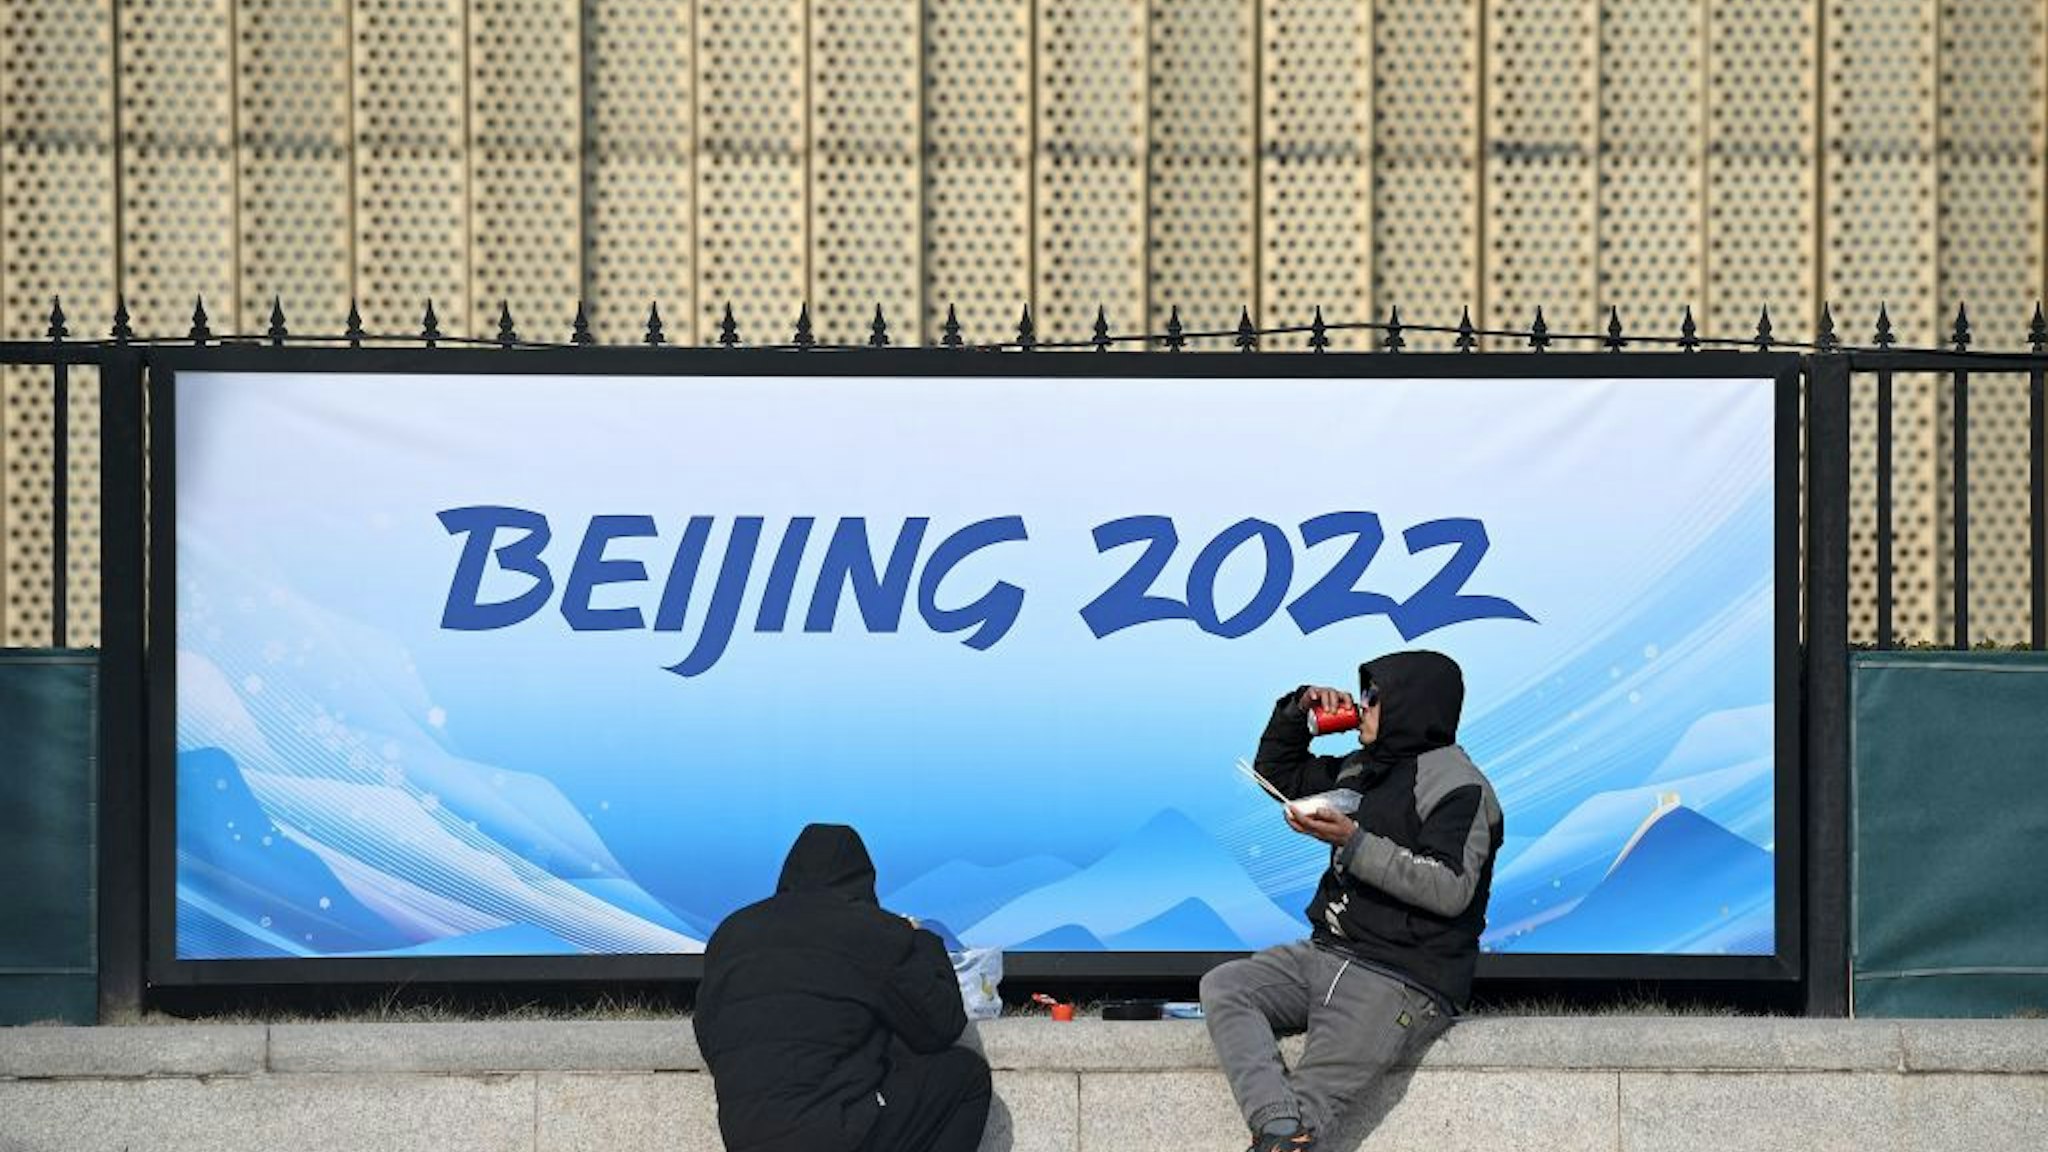 Workers eat at the Wukesong Sports Centre, venue for the ice hockey competition during the 2022 Beijing Winter Olympics, in Beijing on January 18, 2022.